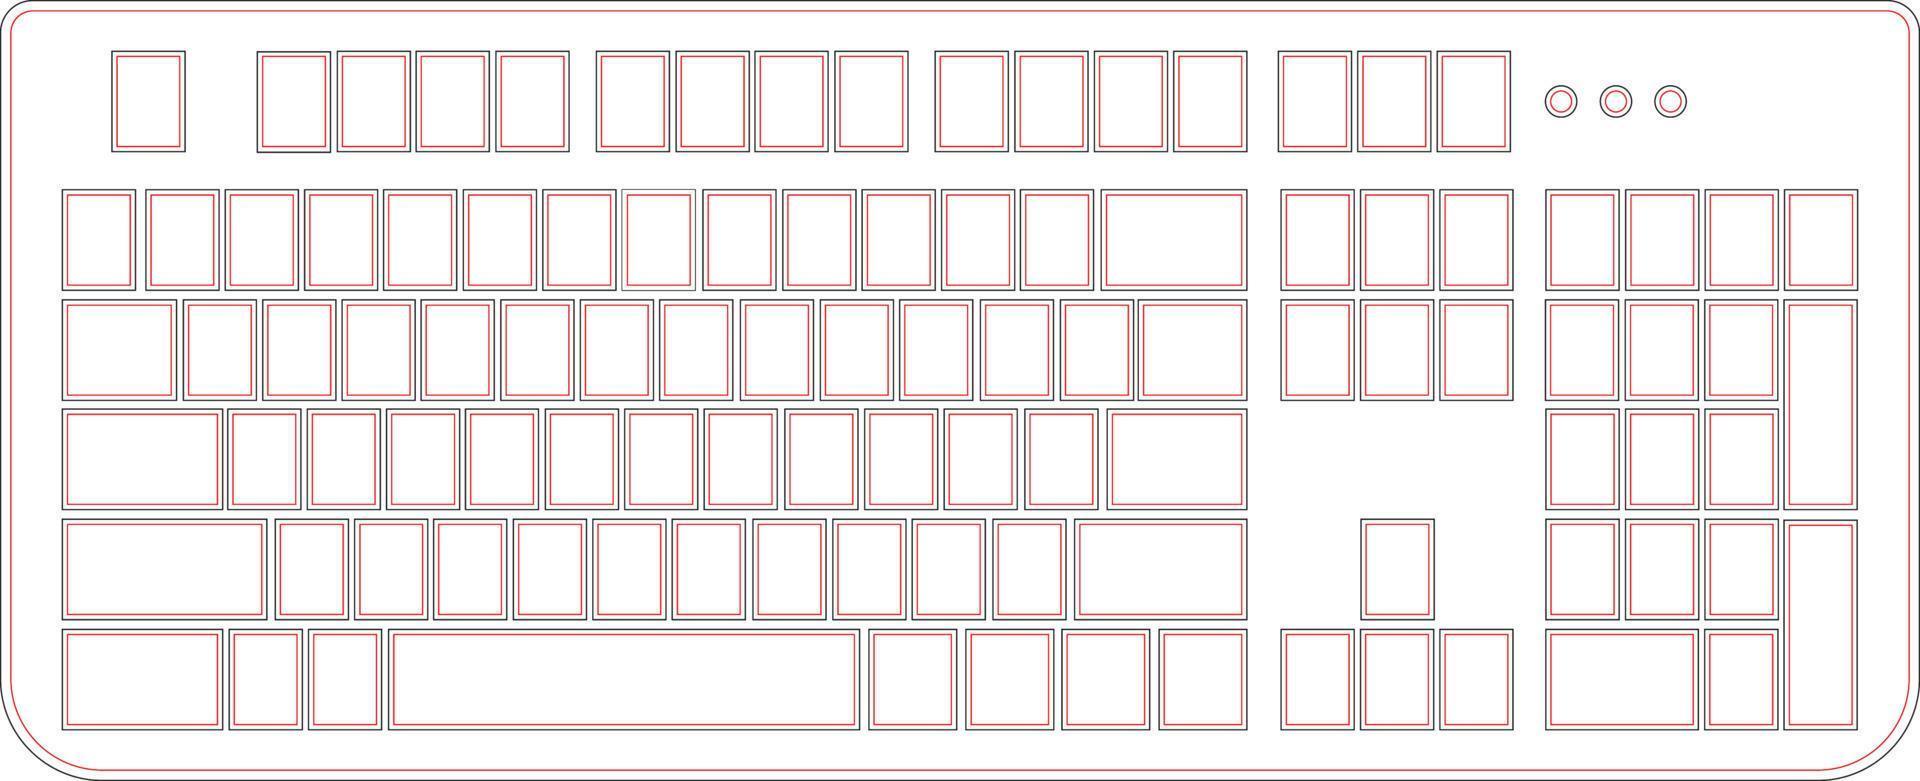 Blank pc keyboard icon illustration communication typing writing electronic technology equipment vector